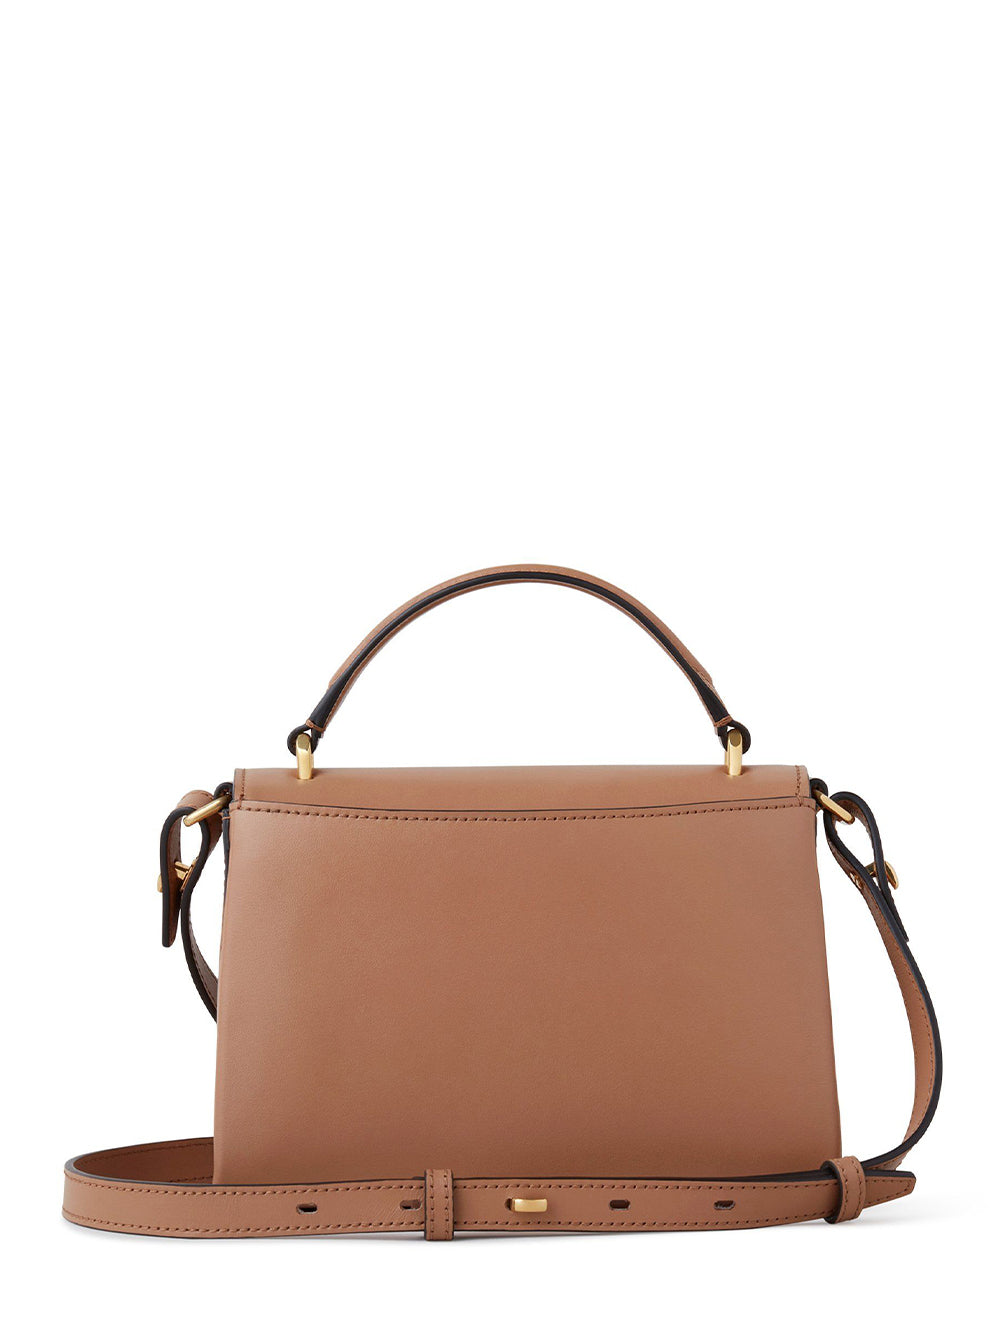 Mulberry-SmallLanaTopHandle-SableHighGlossLeather-2